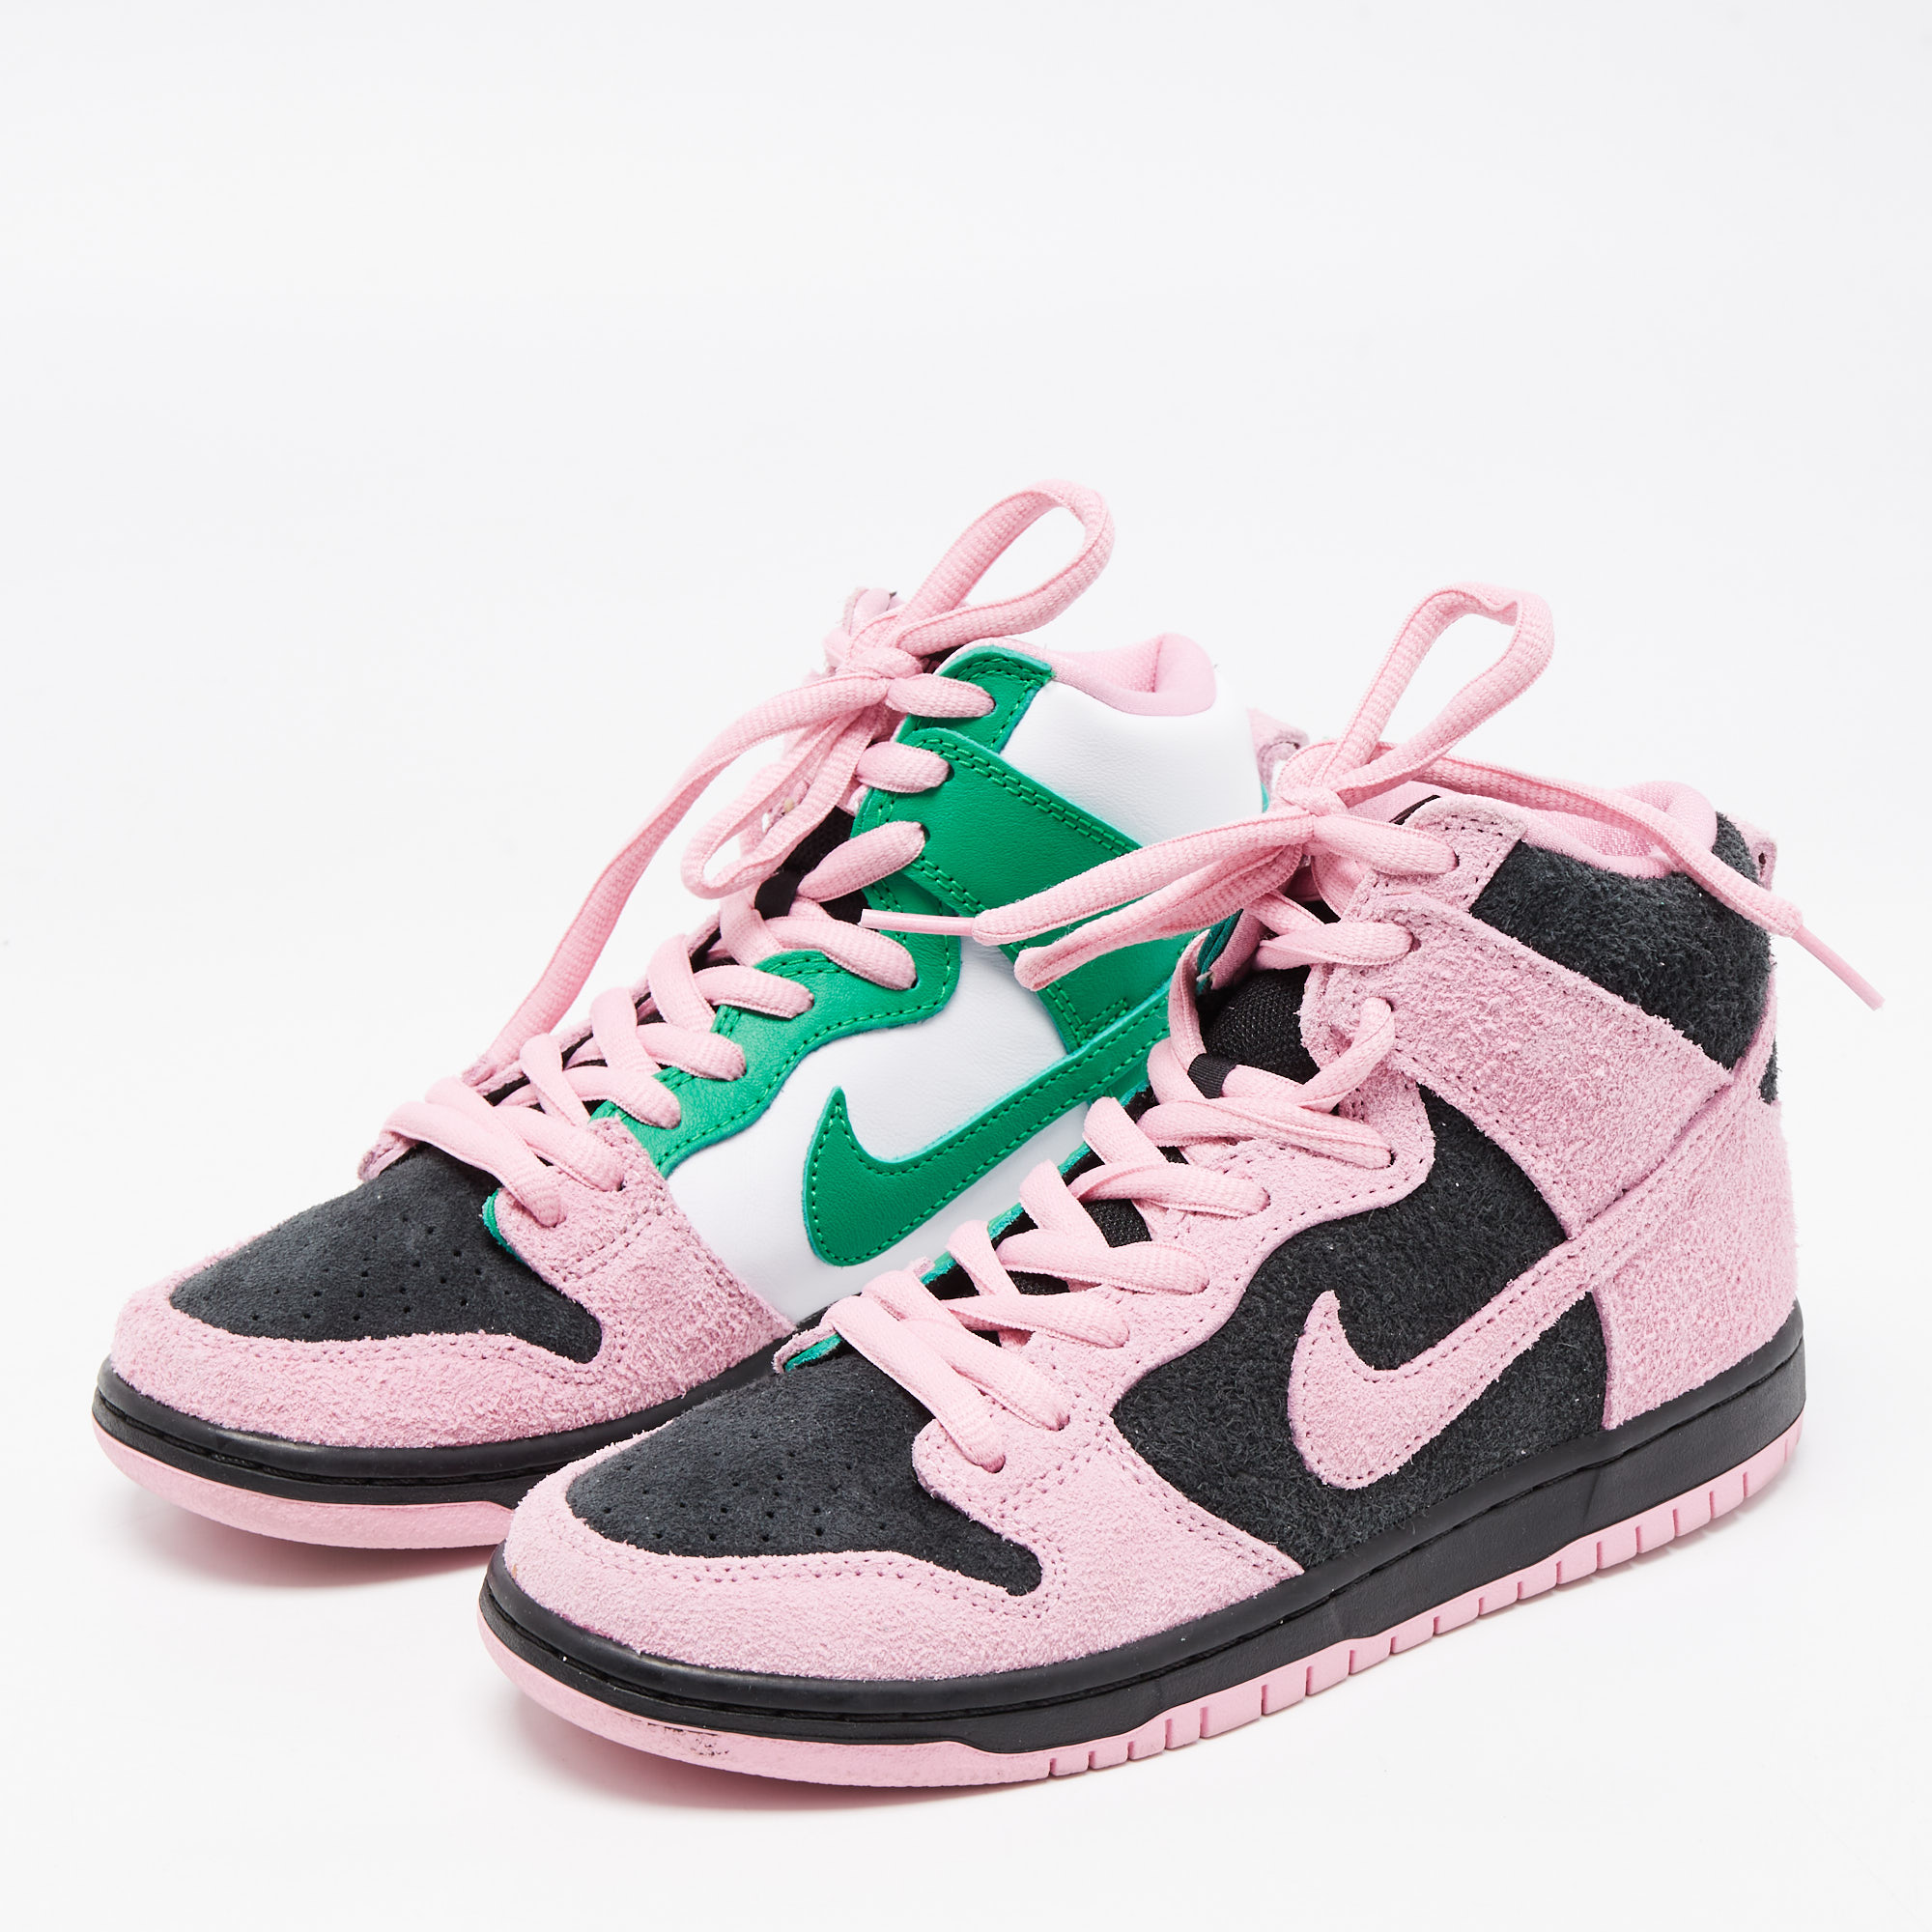 

Air Jordans Tricolor Leather and Suede SB Dunk High Sneakers Size, Pink